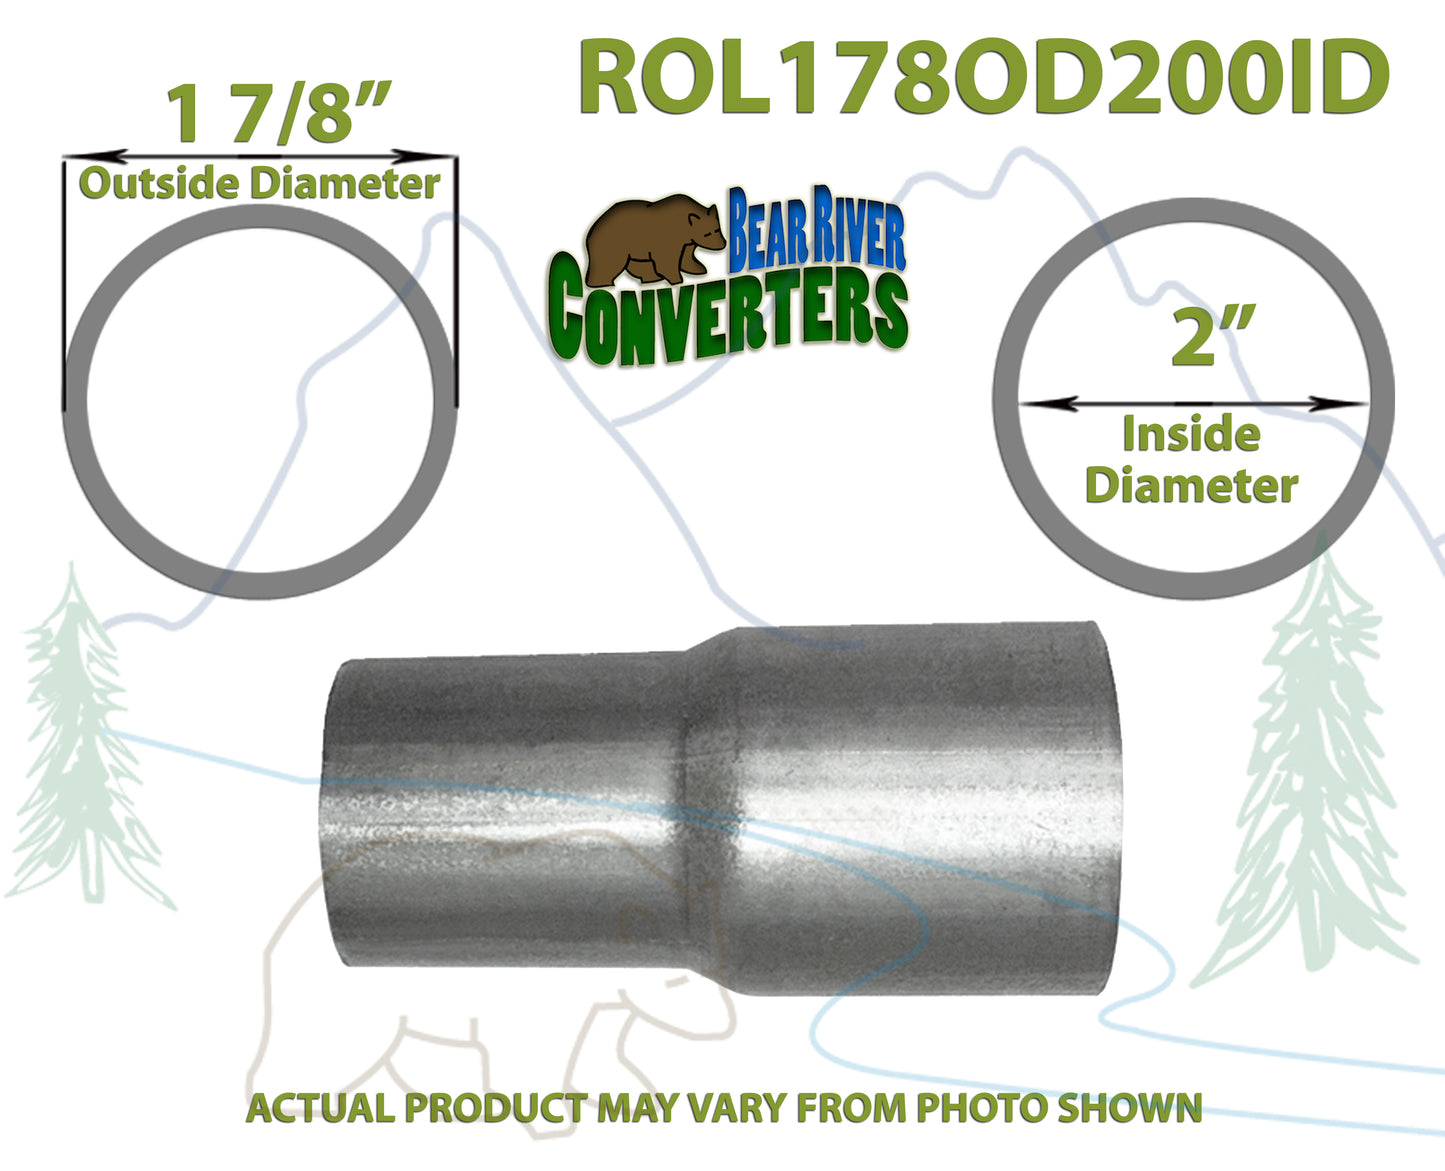 ROL178OD200ID 548528 1 7/8” OD to 2” ID Universal Exhaust Component to Pipe Adapter Reducer